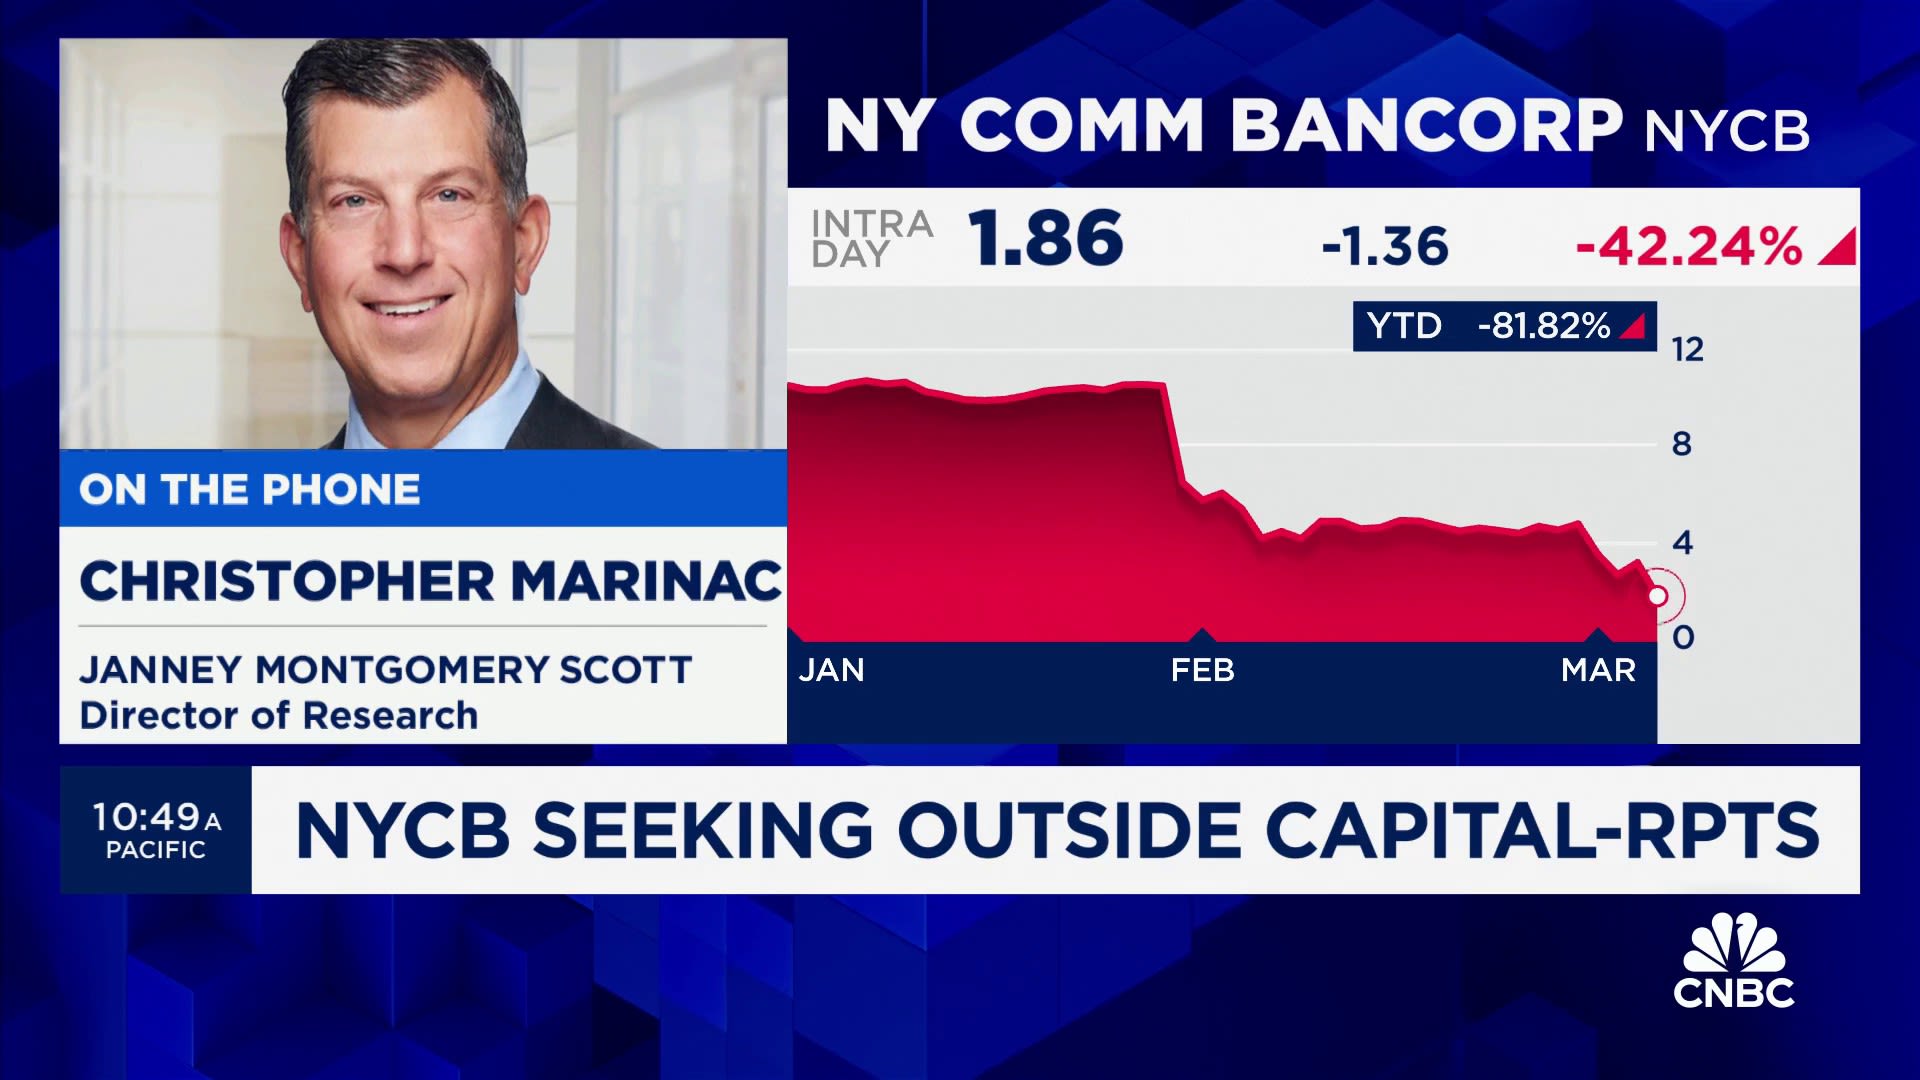 New York Community Bancorp woes: What you need to know